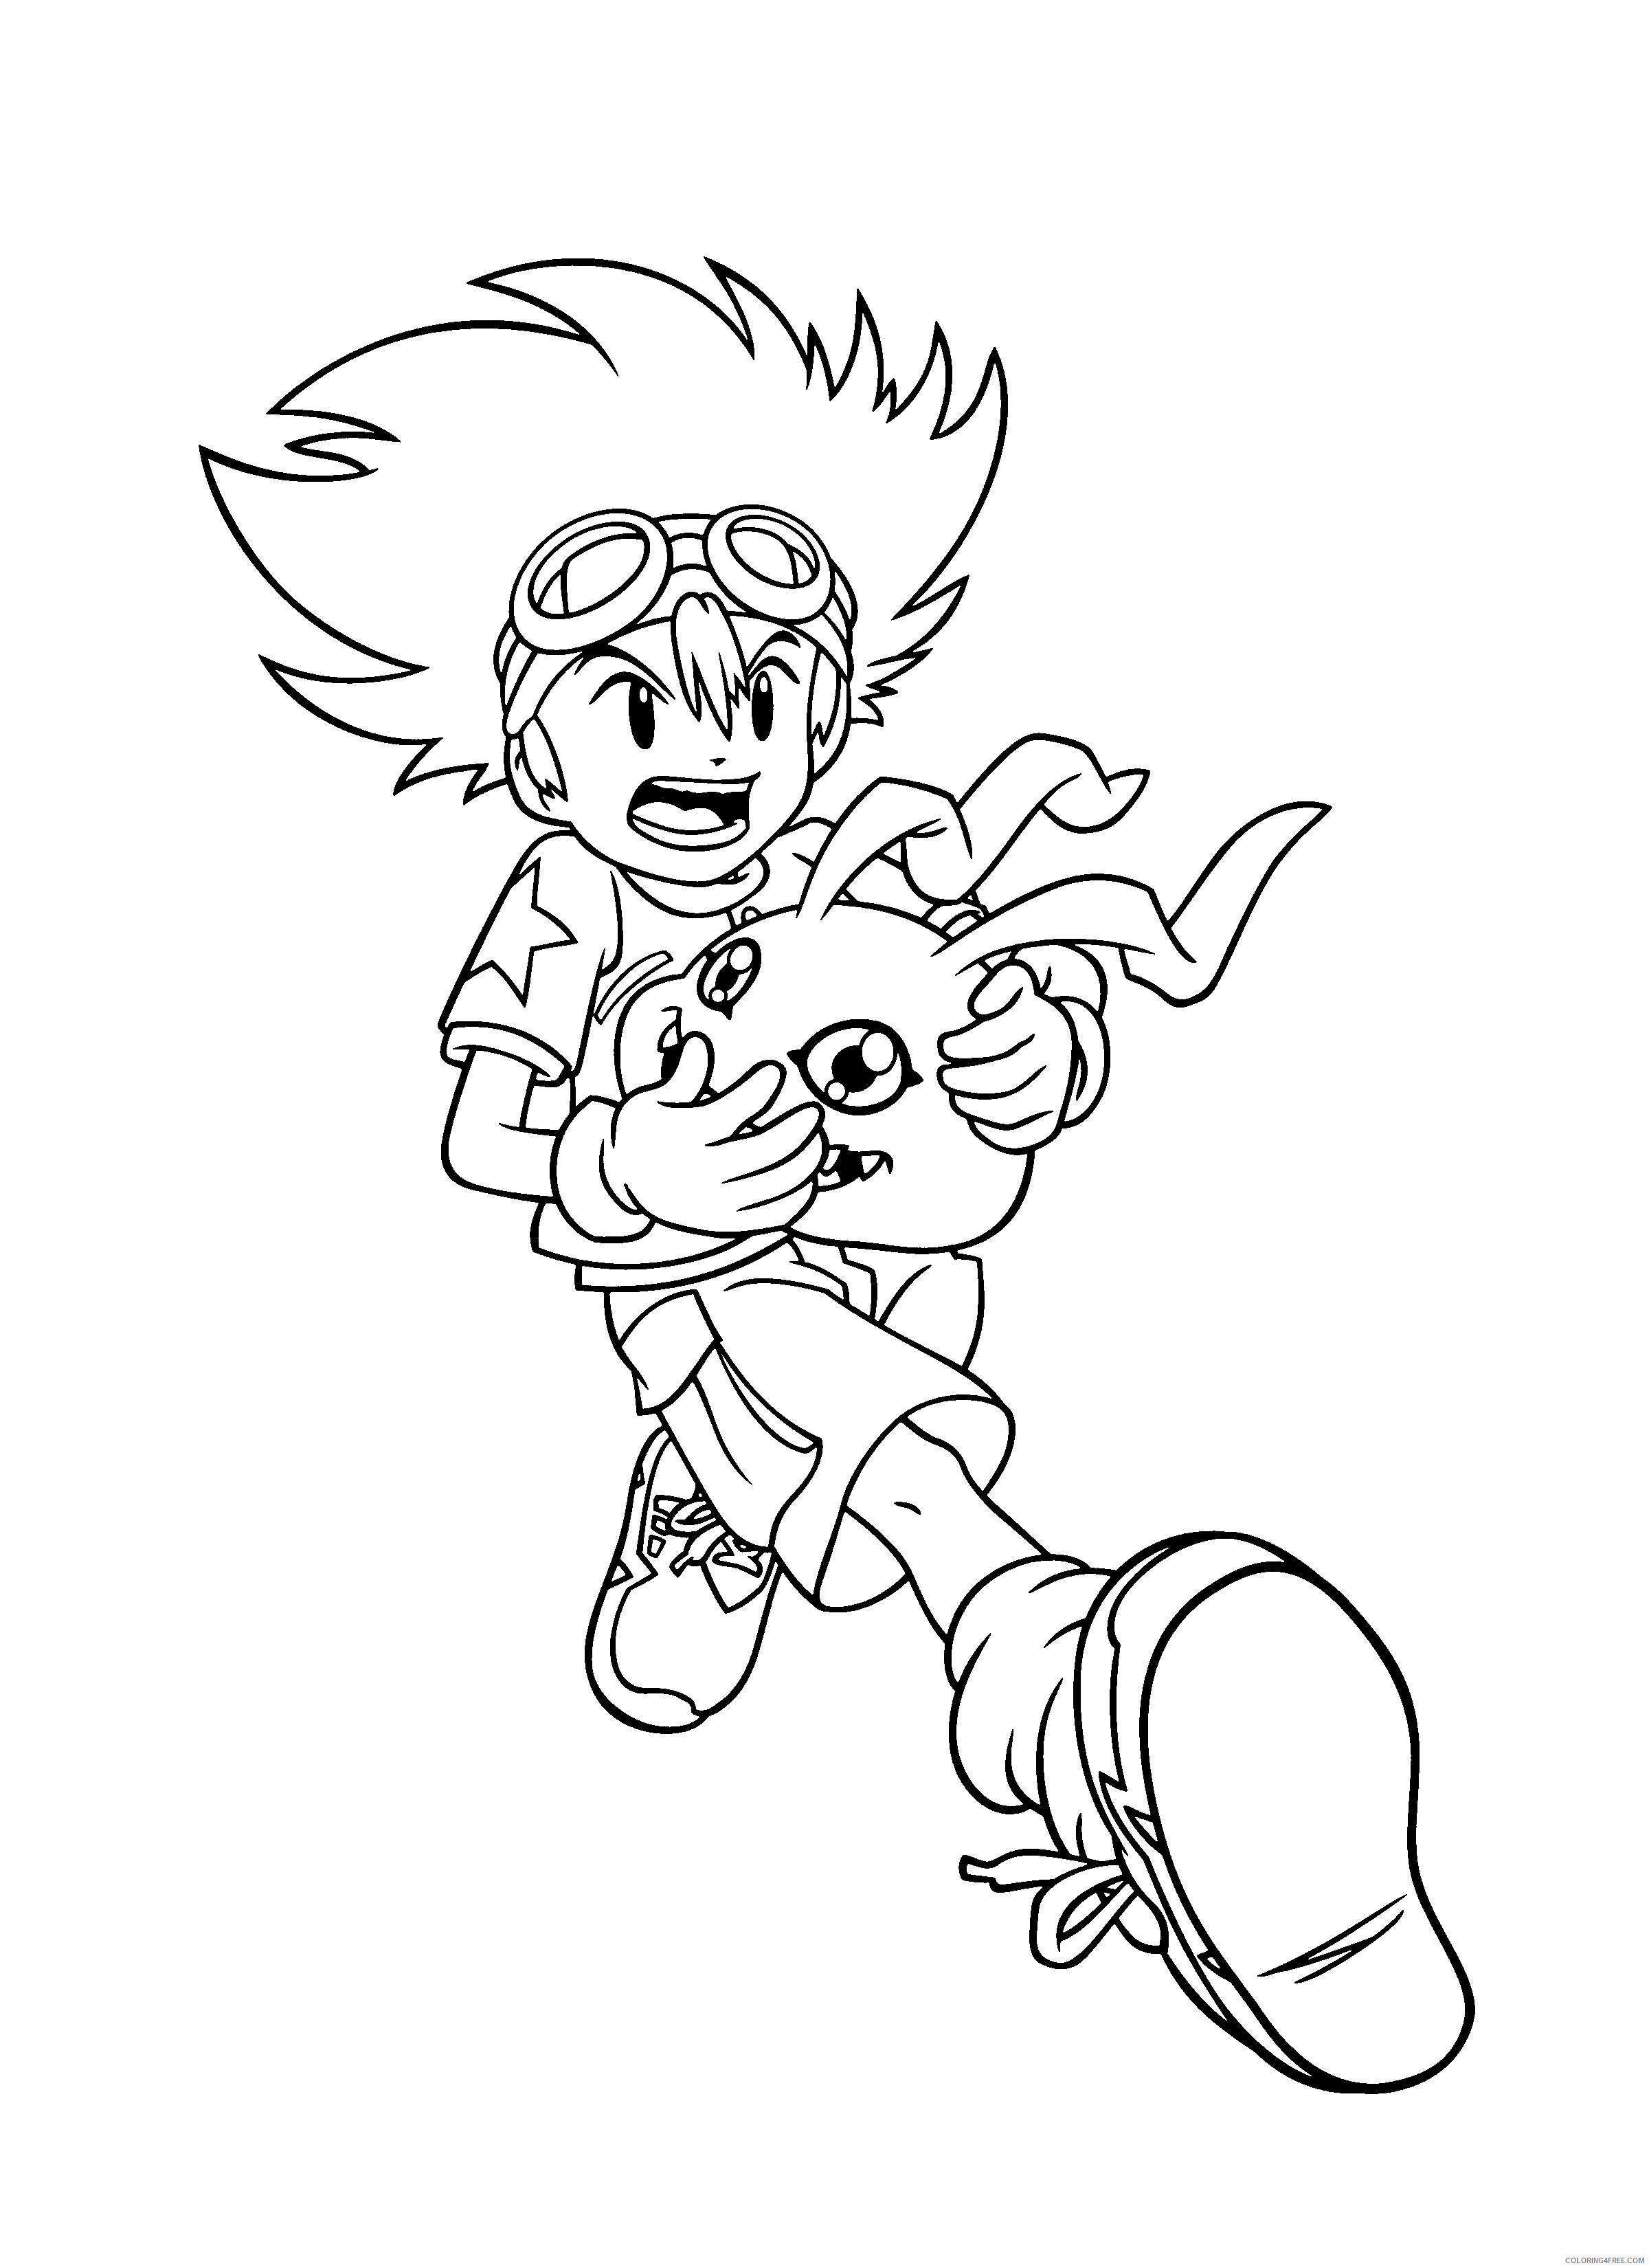 Digimon Printable Coloring Pages Anime digimon 208 2021 0292 Coloring4free